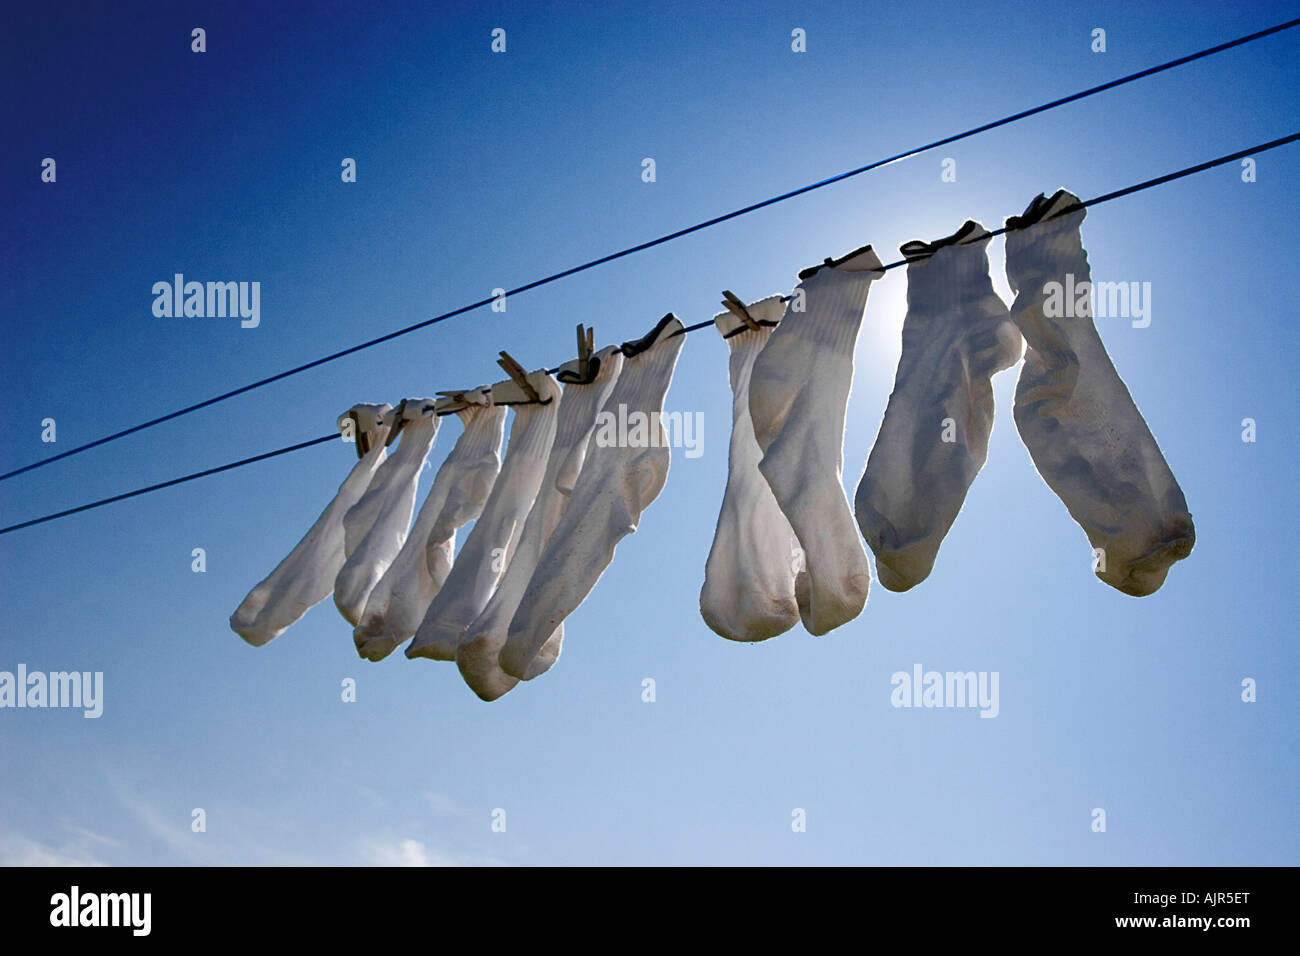 Socks hanging from a clothes line Stock Photo - Alamy